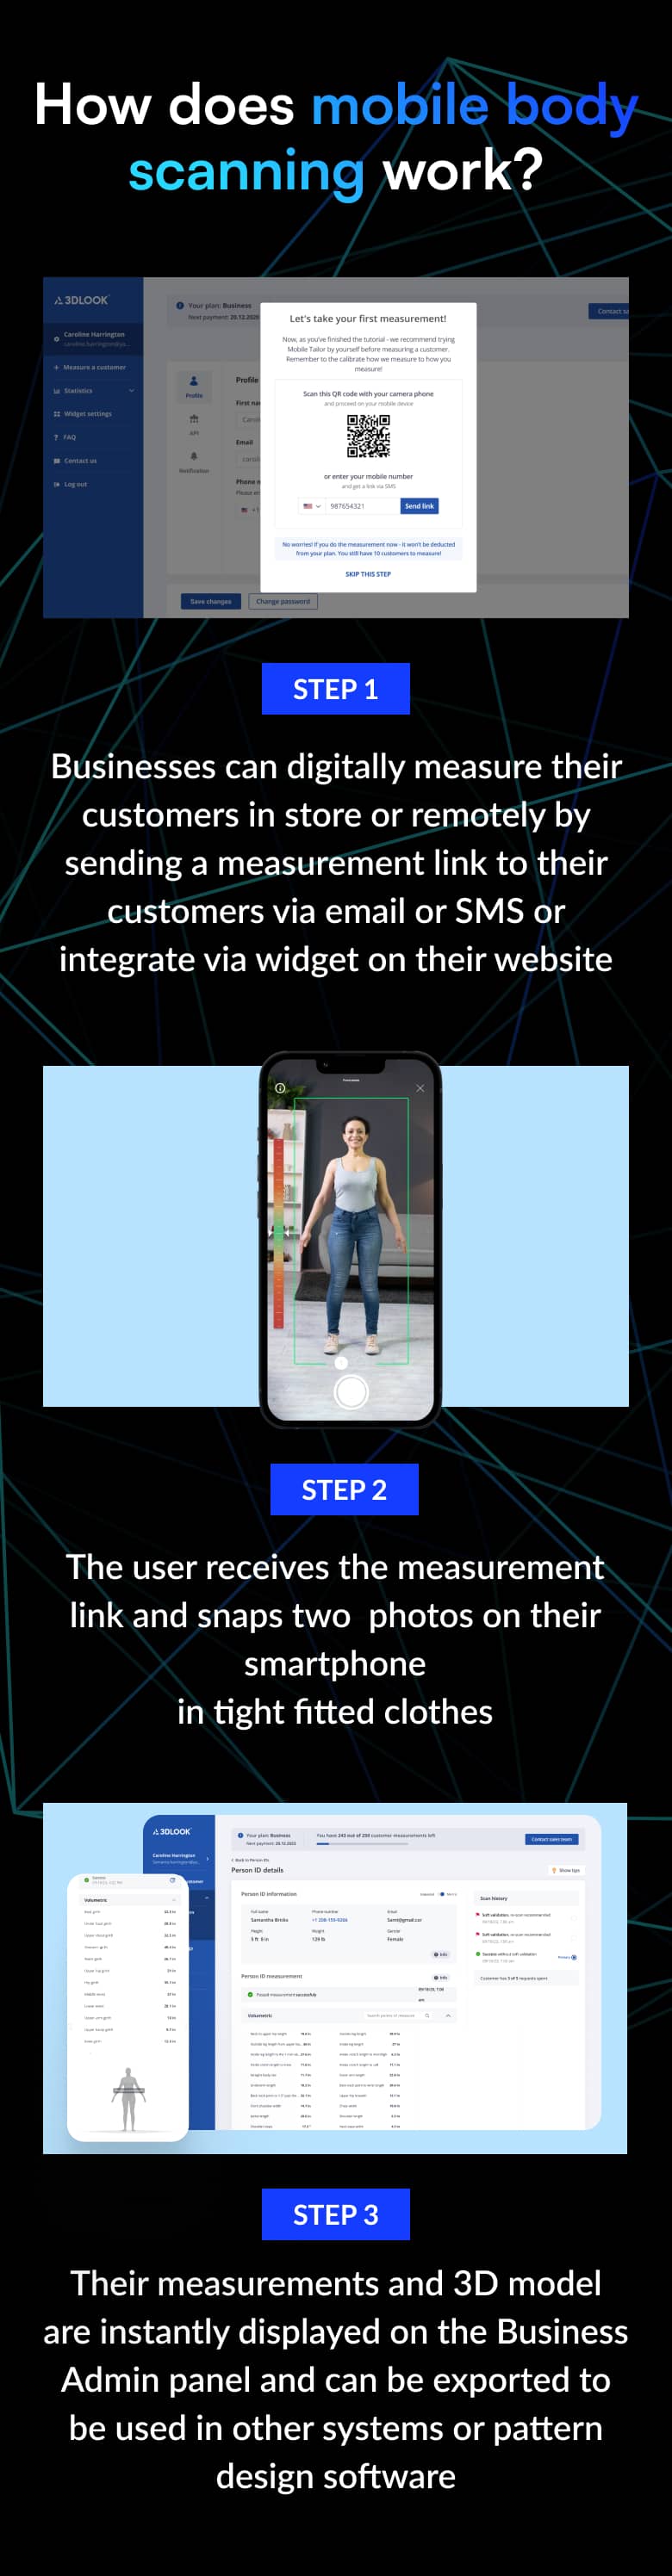 Learn how mobile body scanning works with this informative infographic, featuring SEO keywords and virtual body measurements.